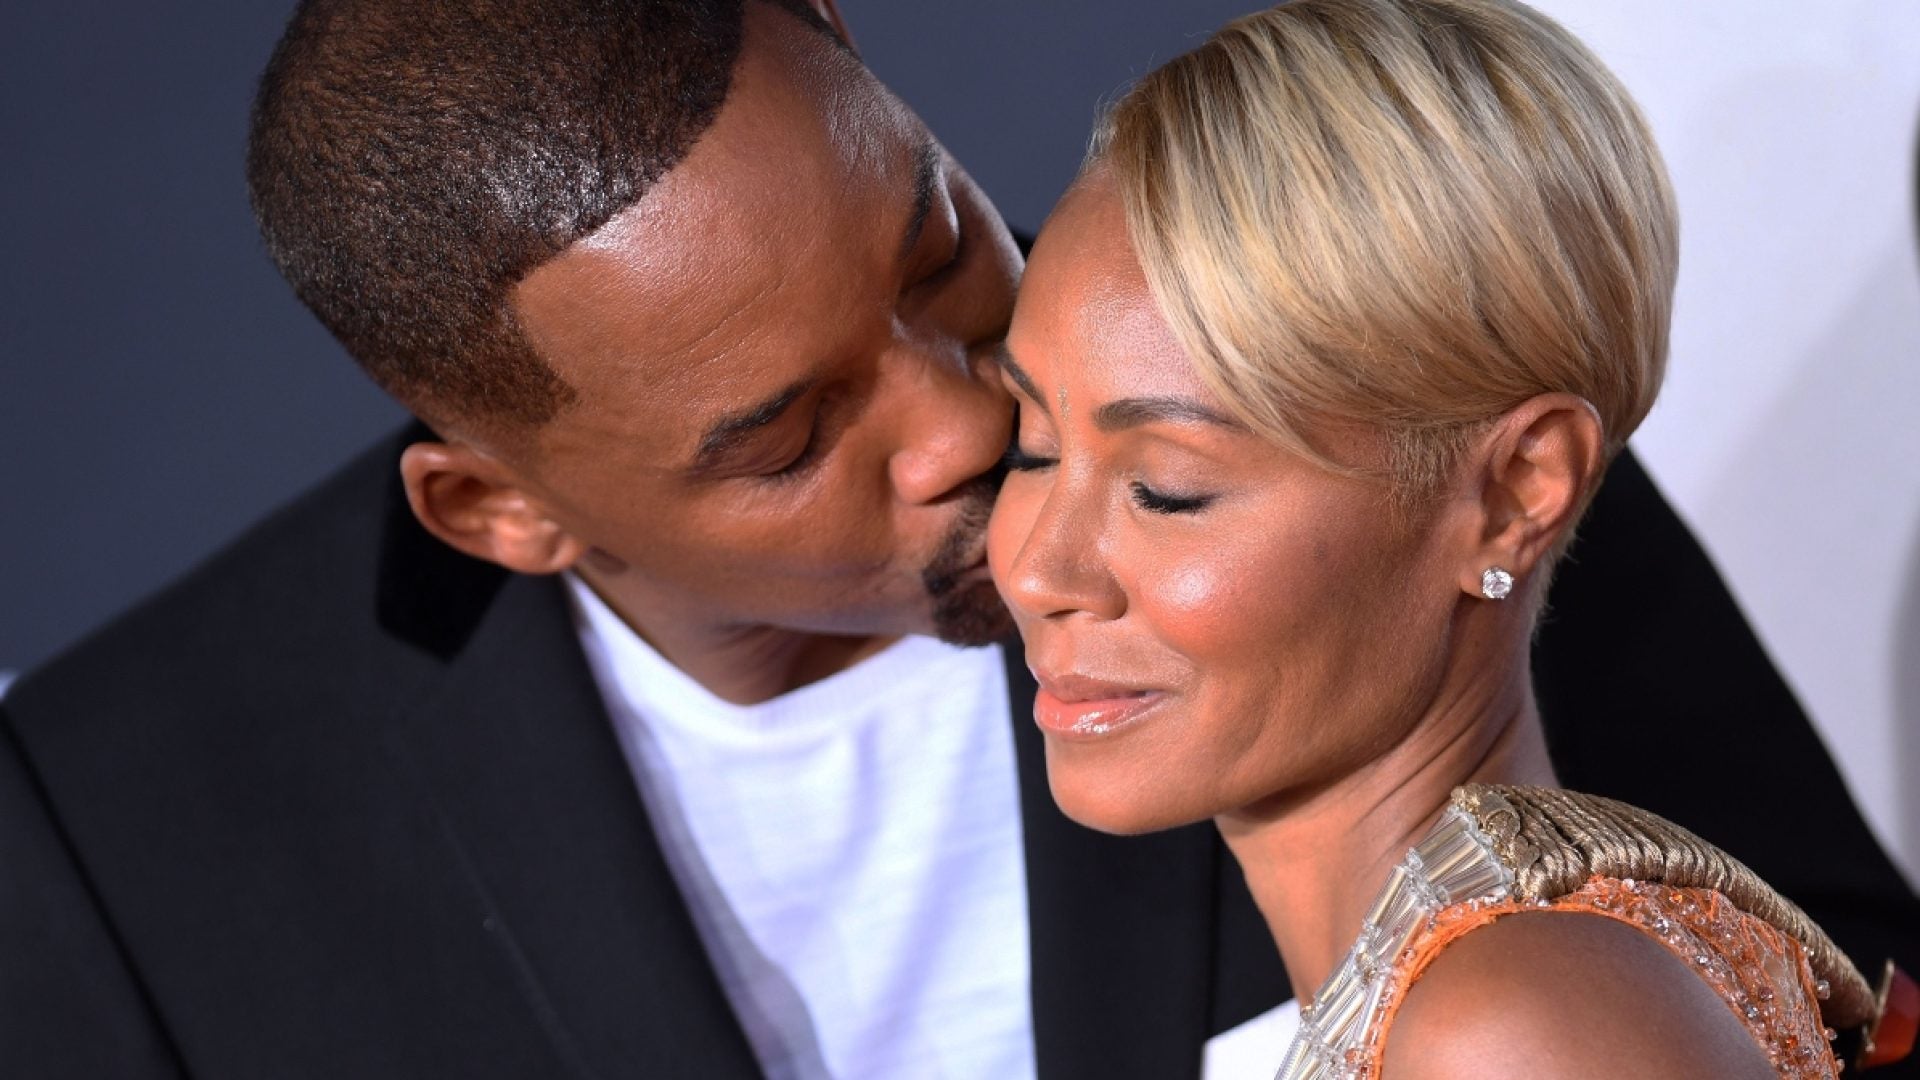 Why Are We Committed To Making Jada Pinkett Smith The Villain In Her Marriage?